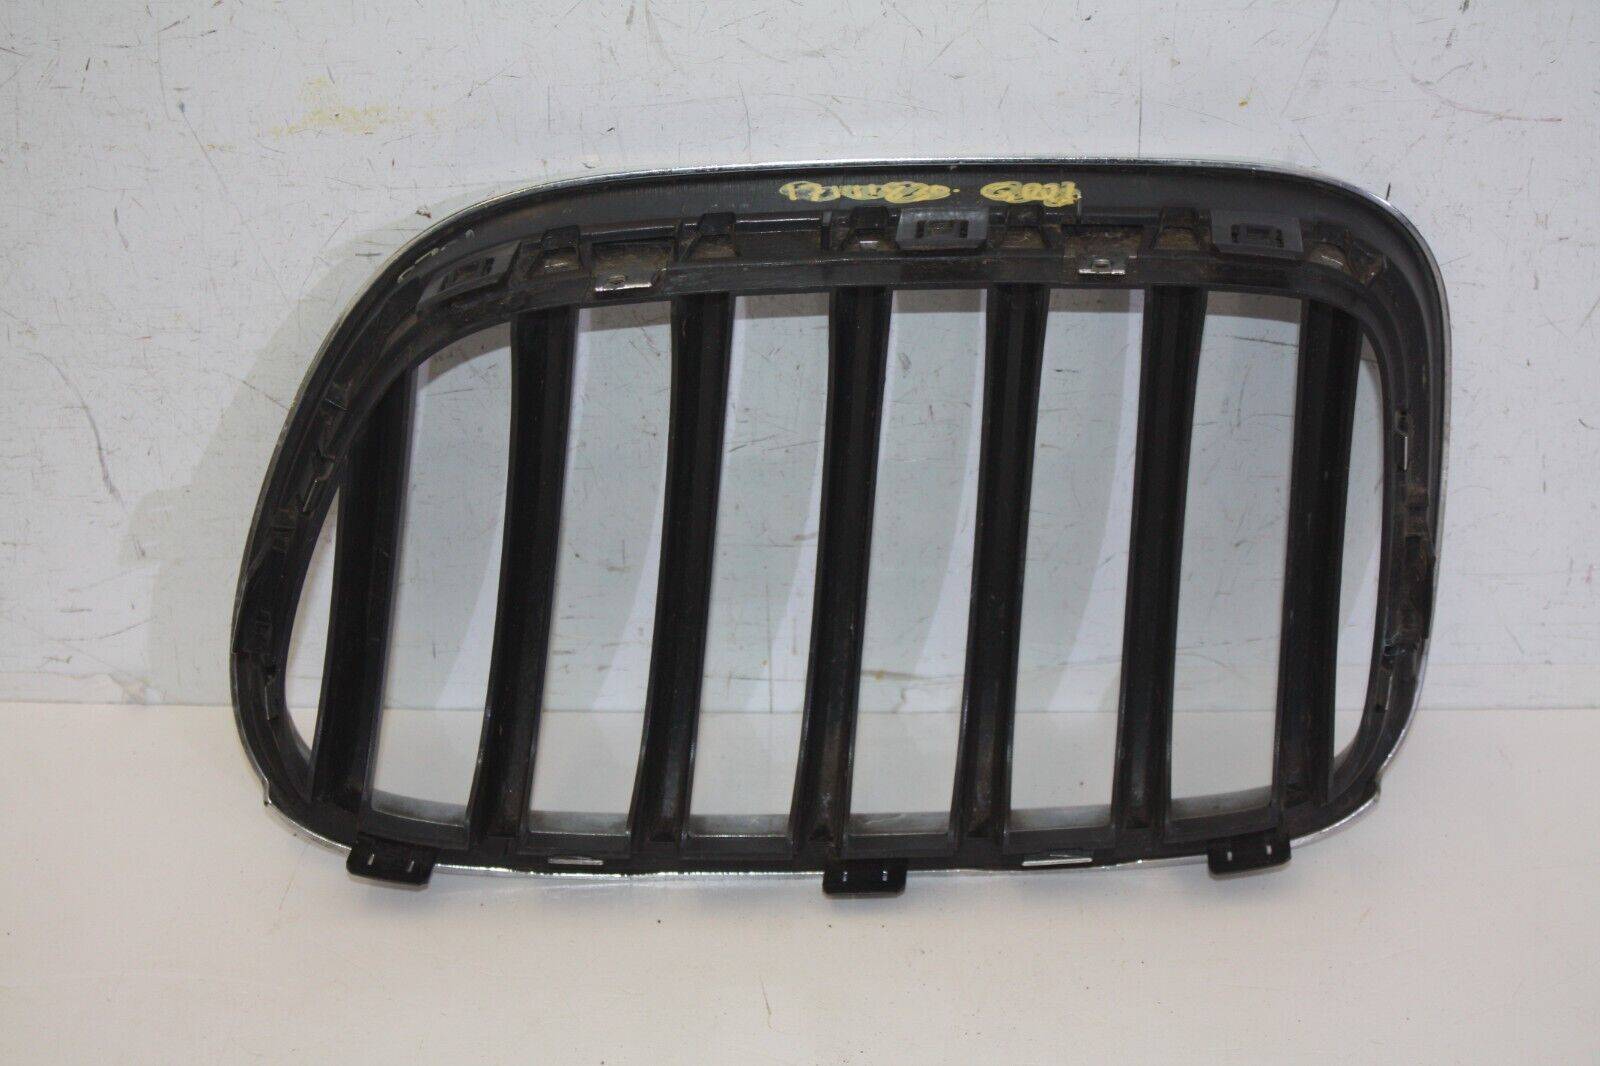 BMW-X3-F25-Front-Bumper-Right-Kidney-Grill-2010-TO-2014-51117210726-Genuine-176234455095-6